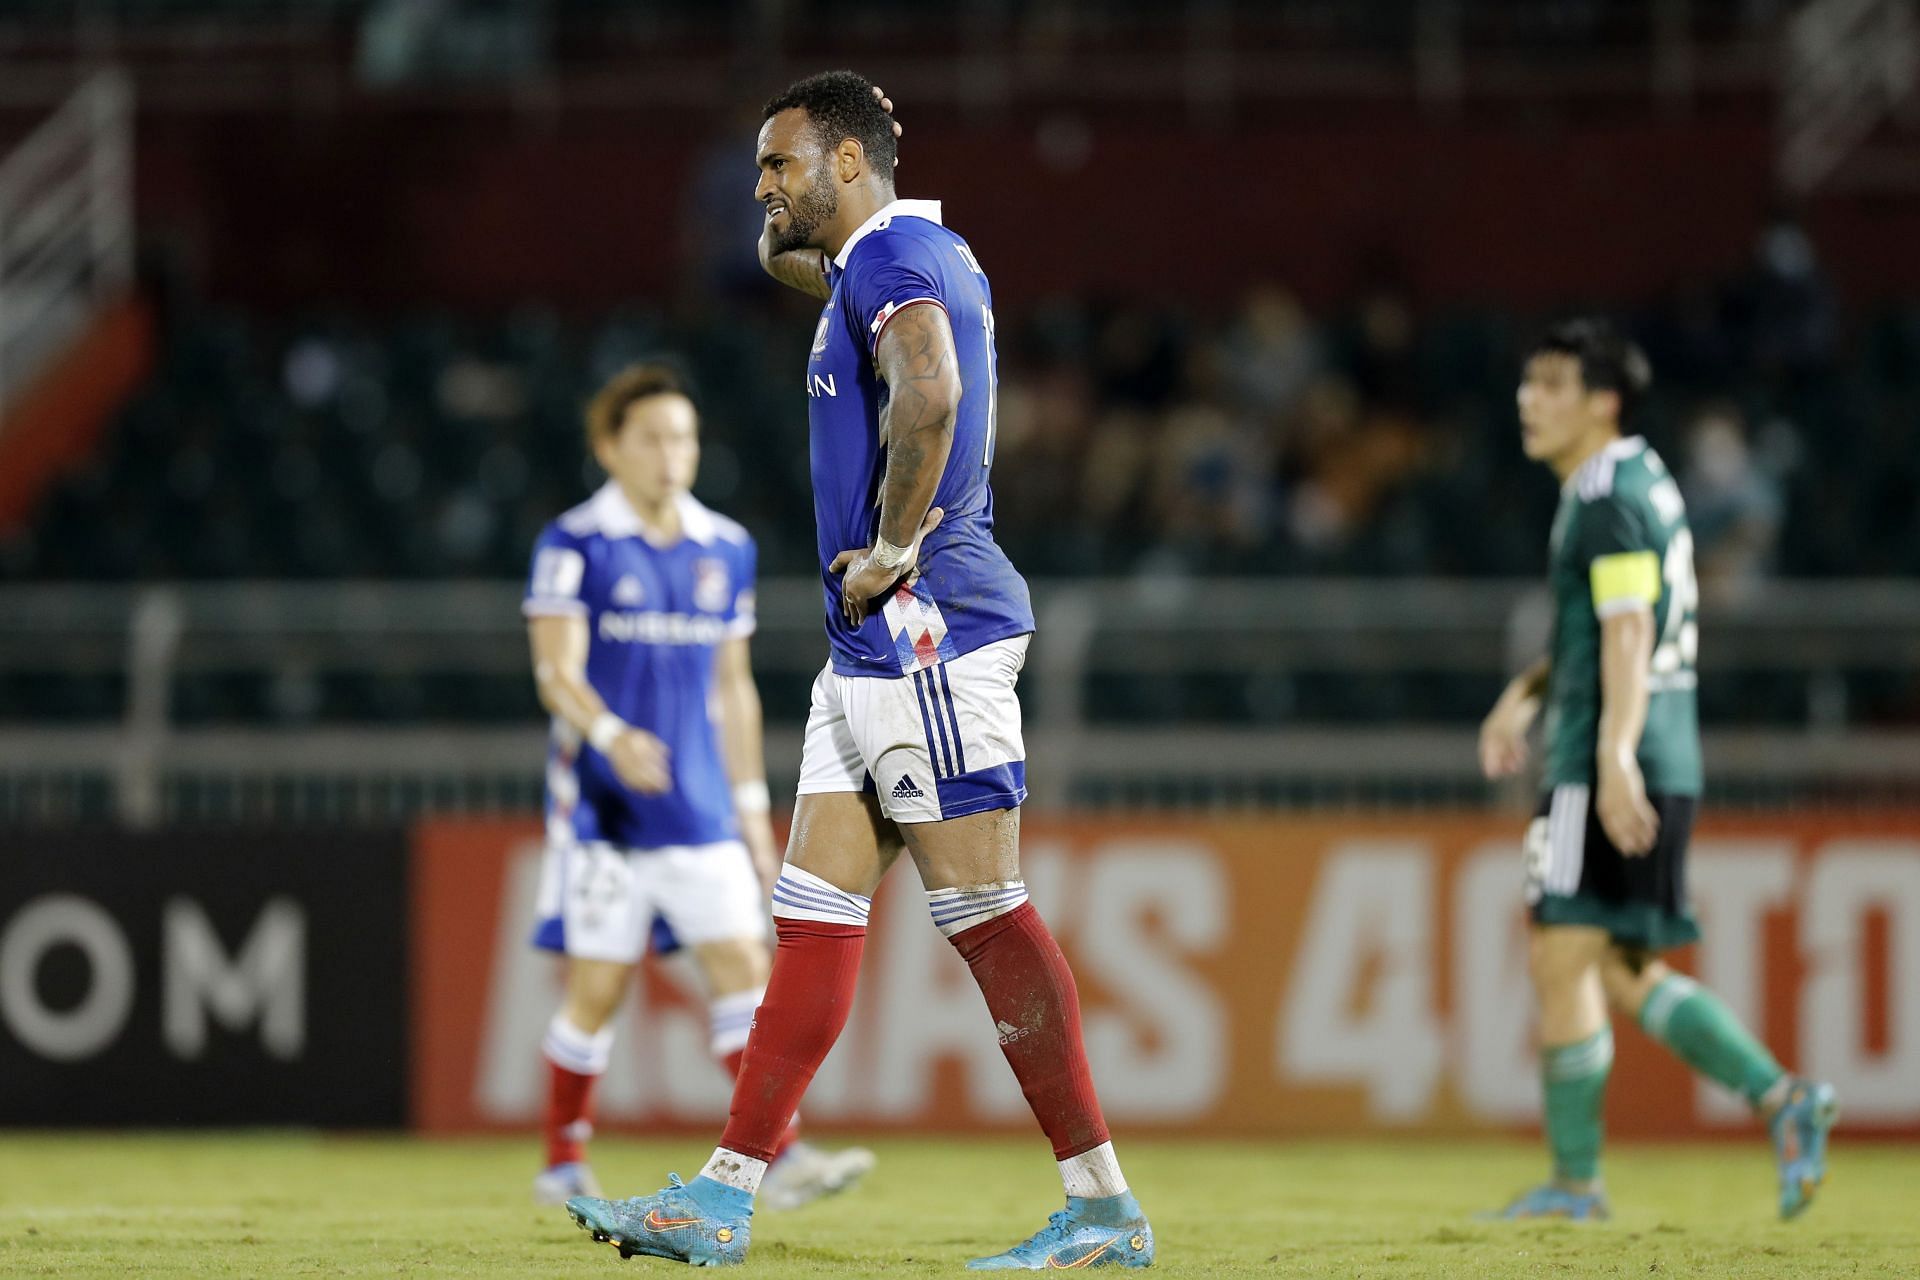 Yokohama F. Marinos suffered a shock defeat in the first leg of the fixture last week